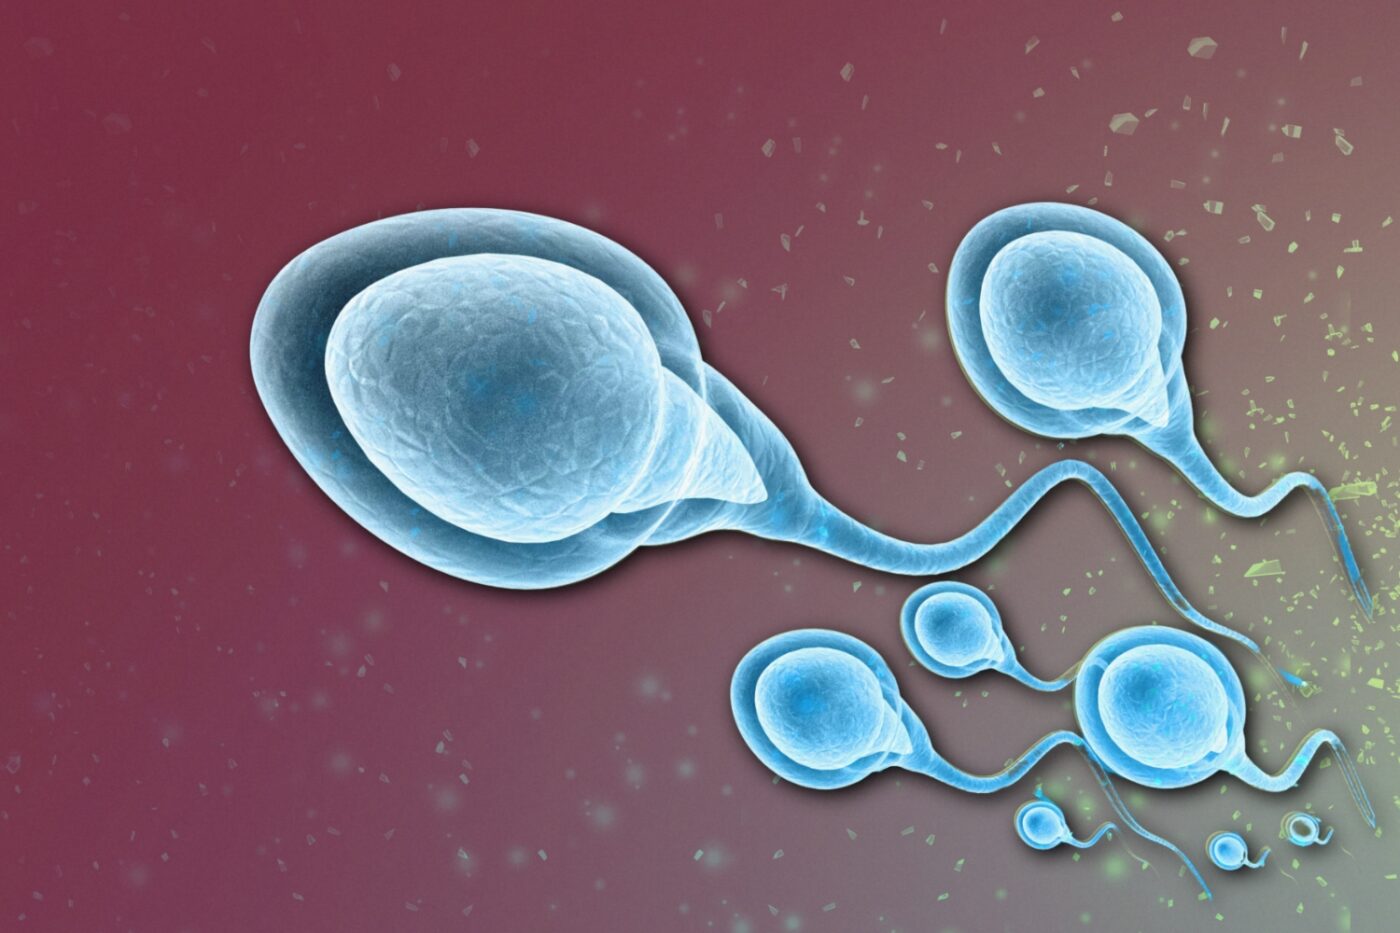 Breakthrough Male Contraceptive Is ‘Safe &amp; Effective’, But There’s One Awkward Catch